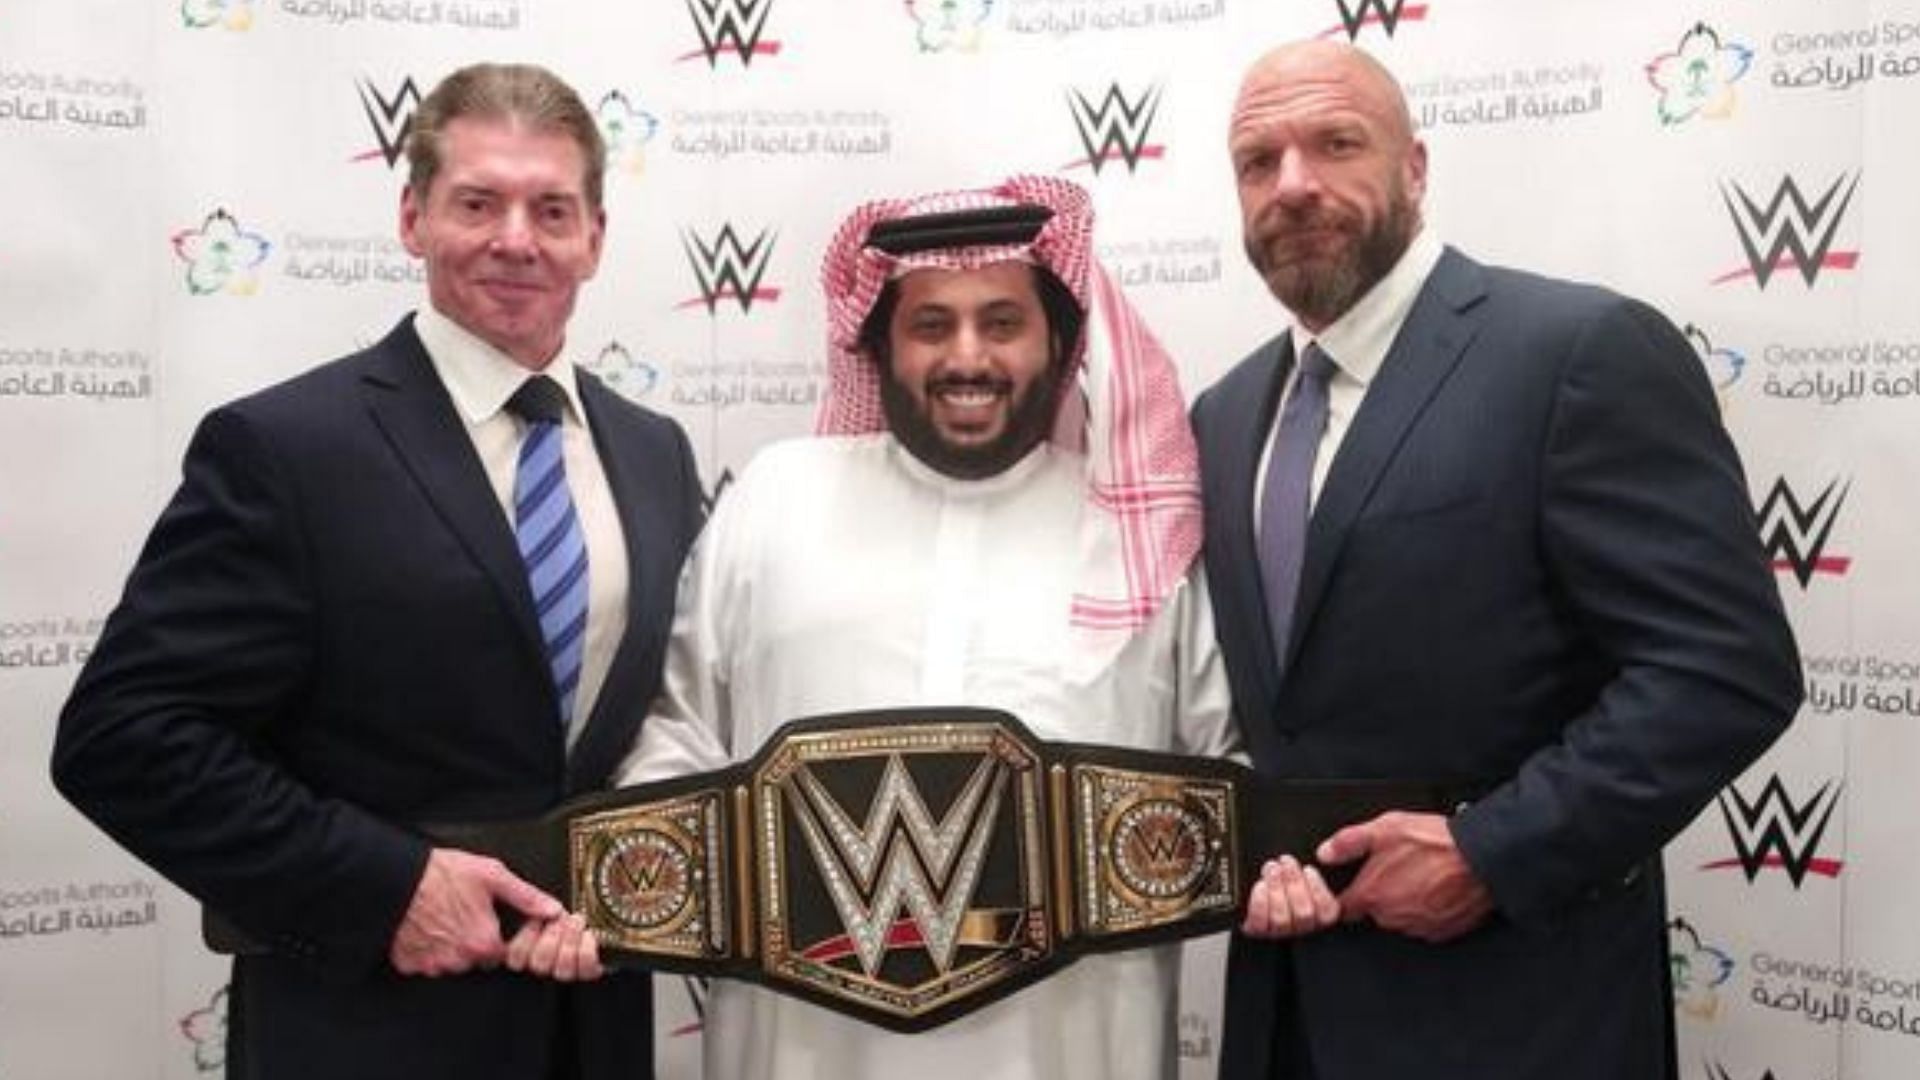 WWE has reached an agreement with Saudi Arabia for premium live events for ten years